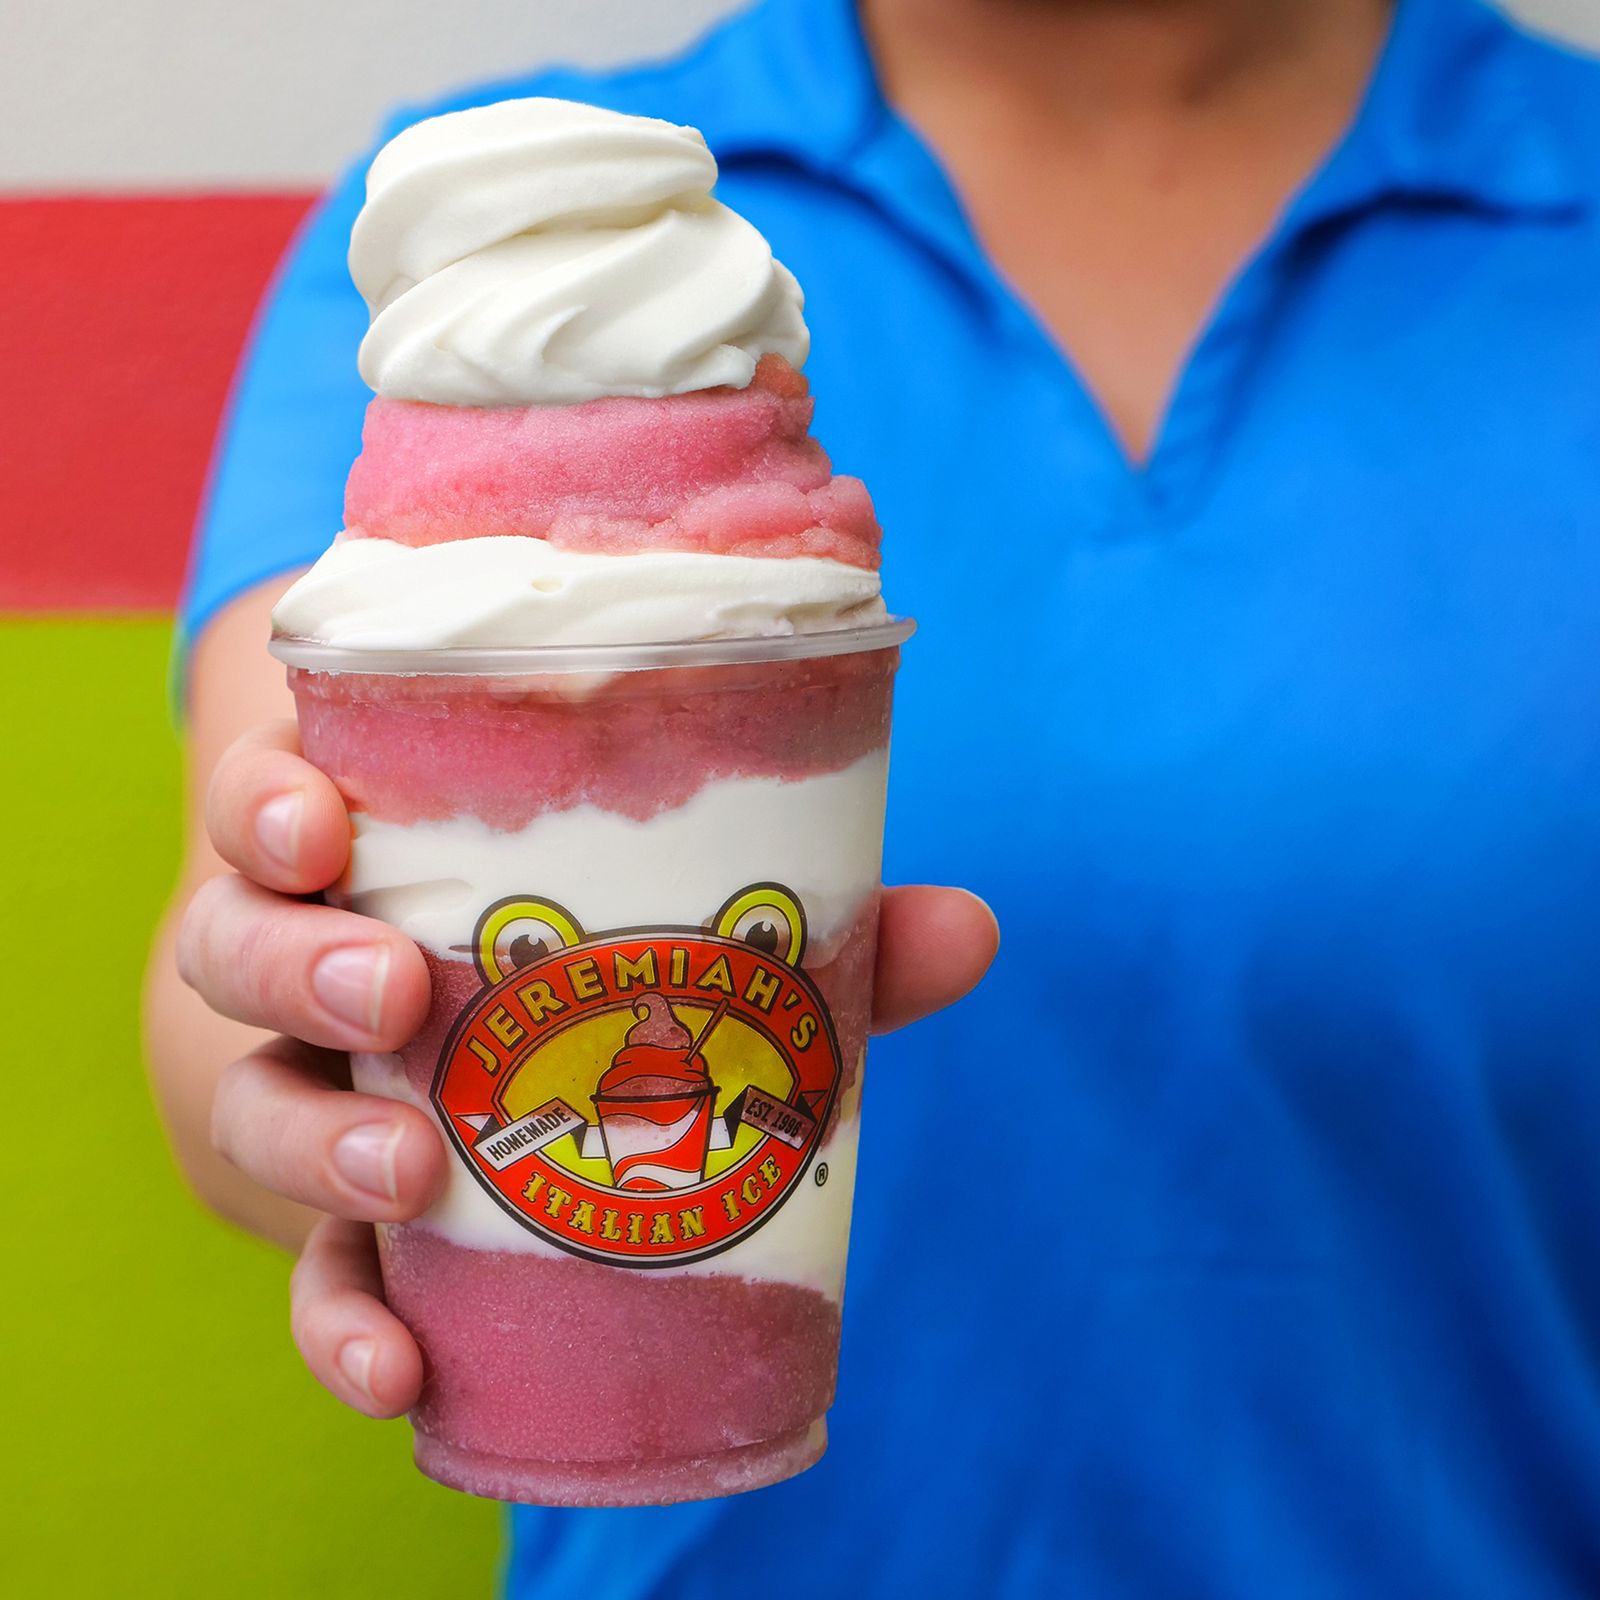 Jeremiah's Italian Ice Continues to Dominate the QSR Dessert Space Throughout 2021